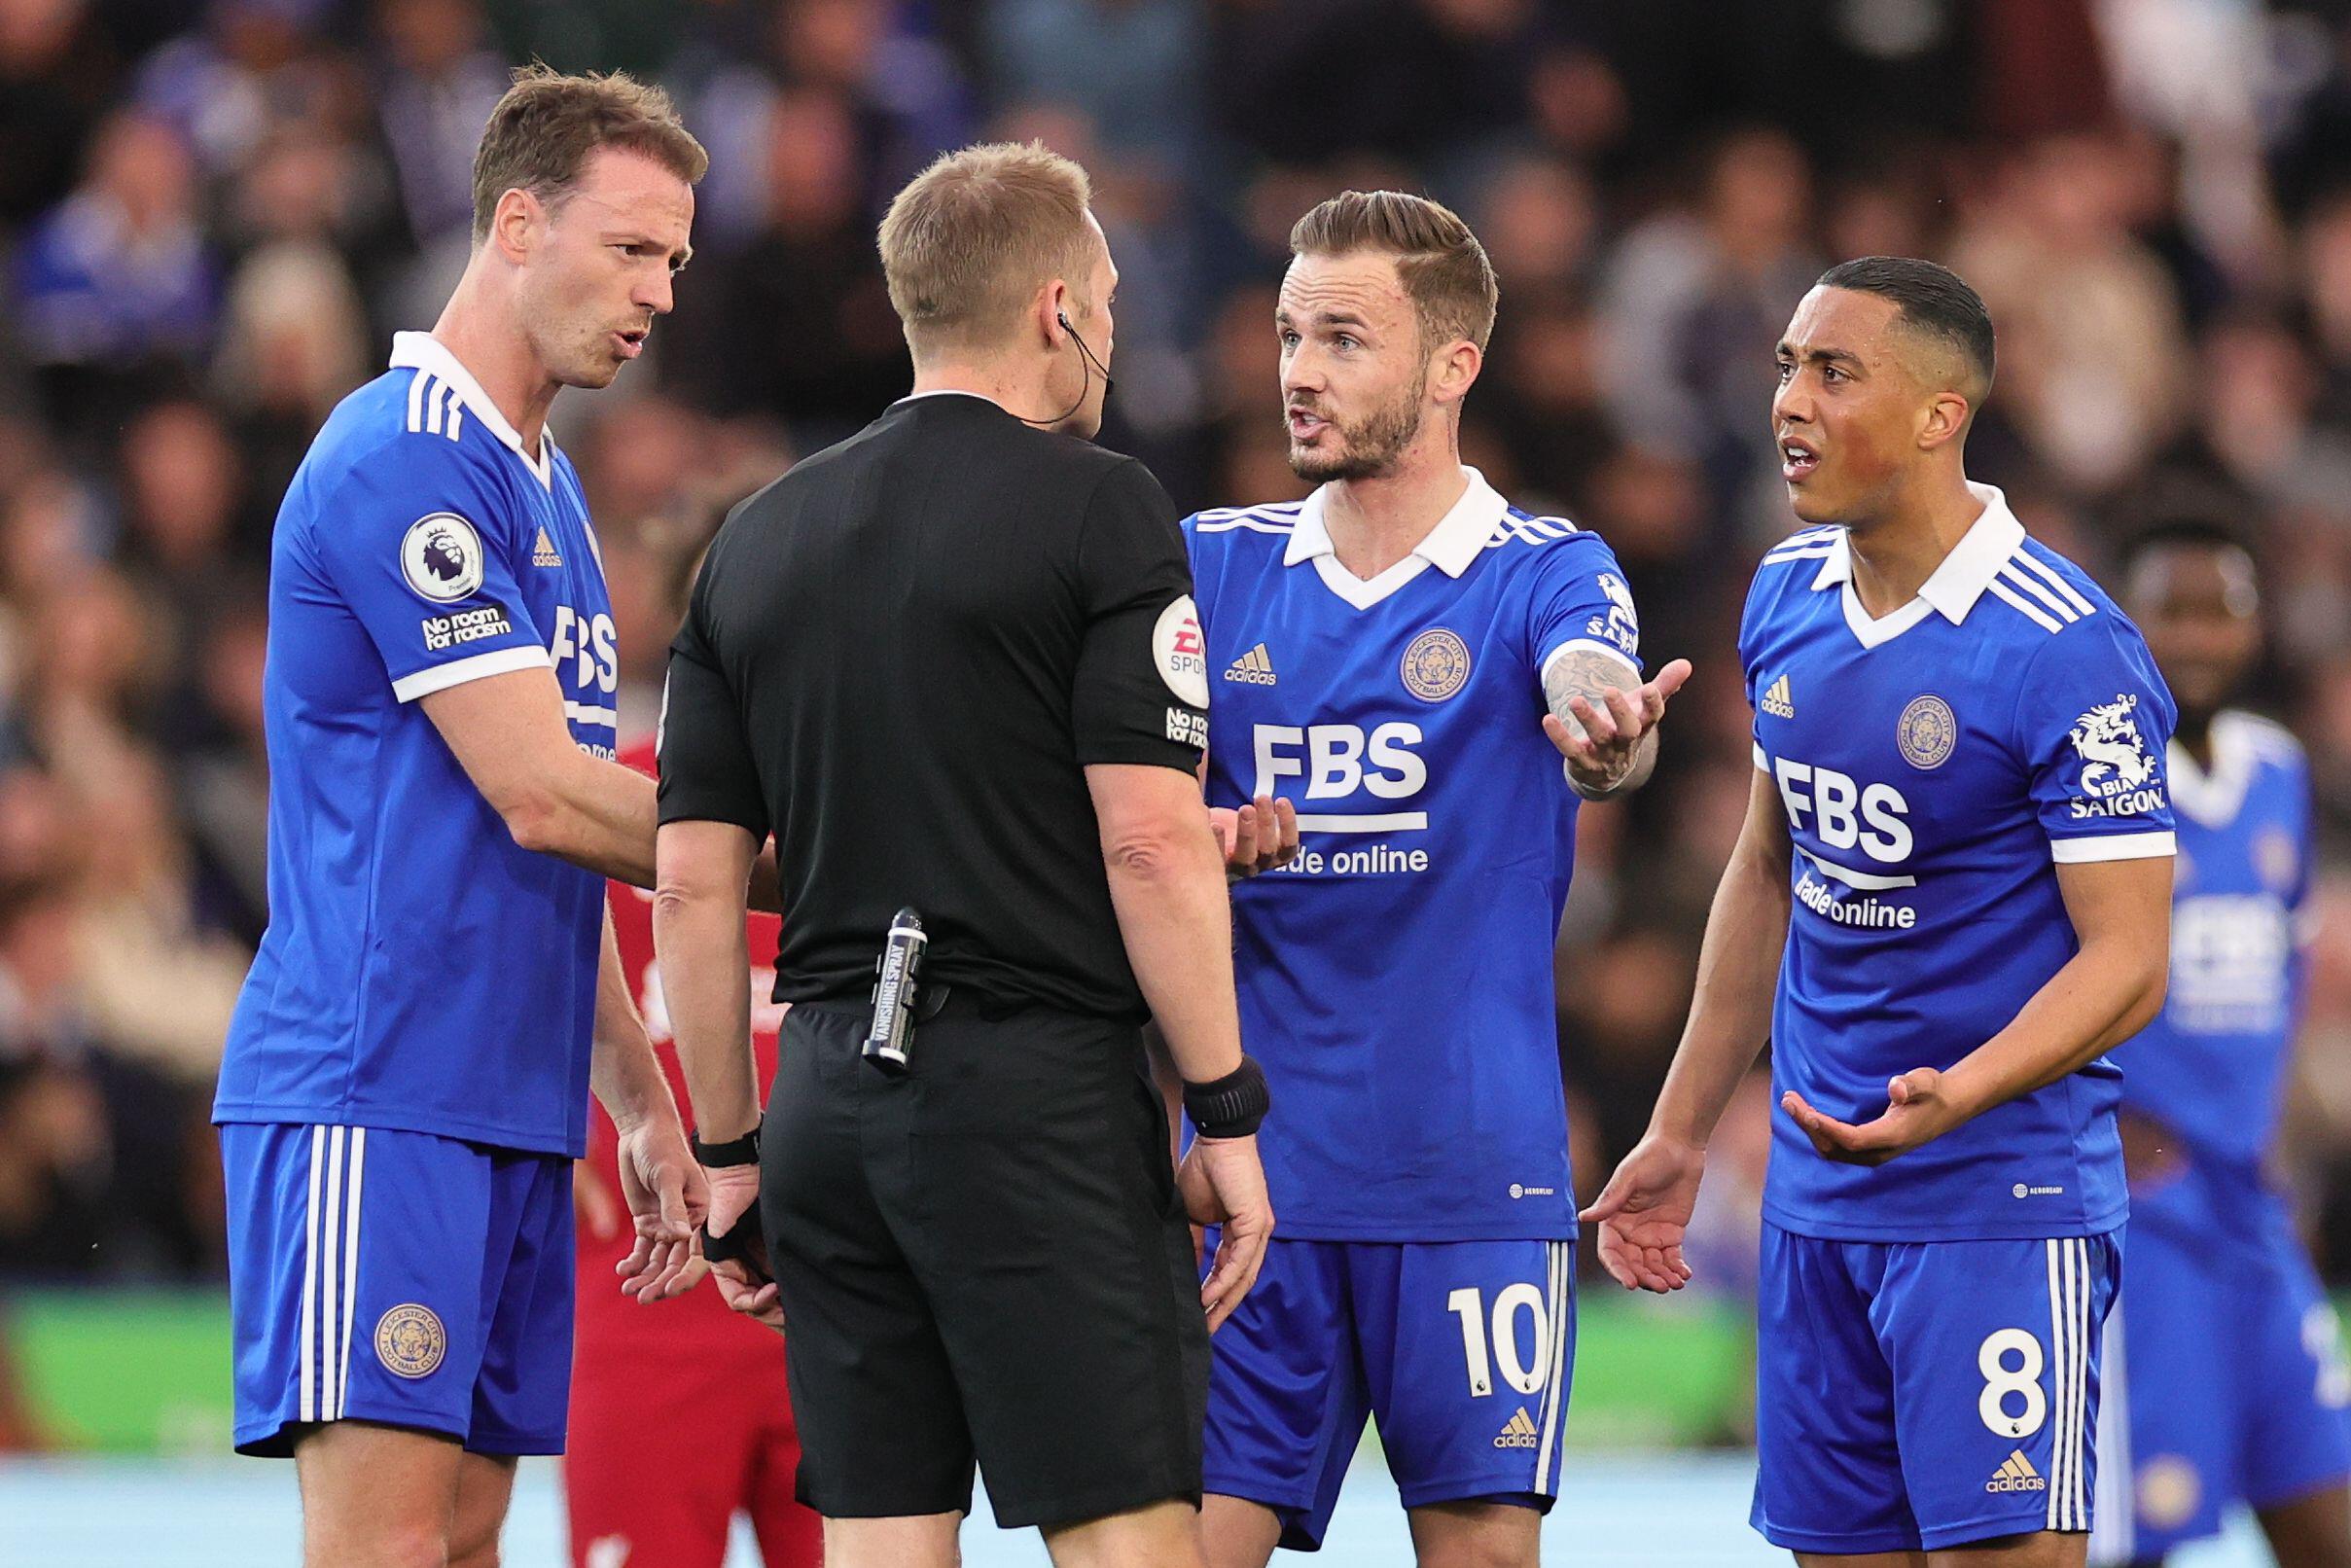 Leicester City surround the referee